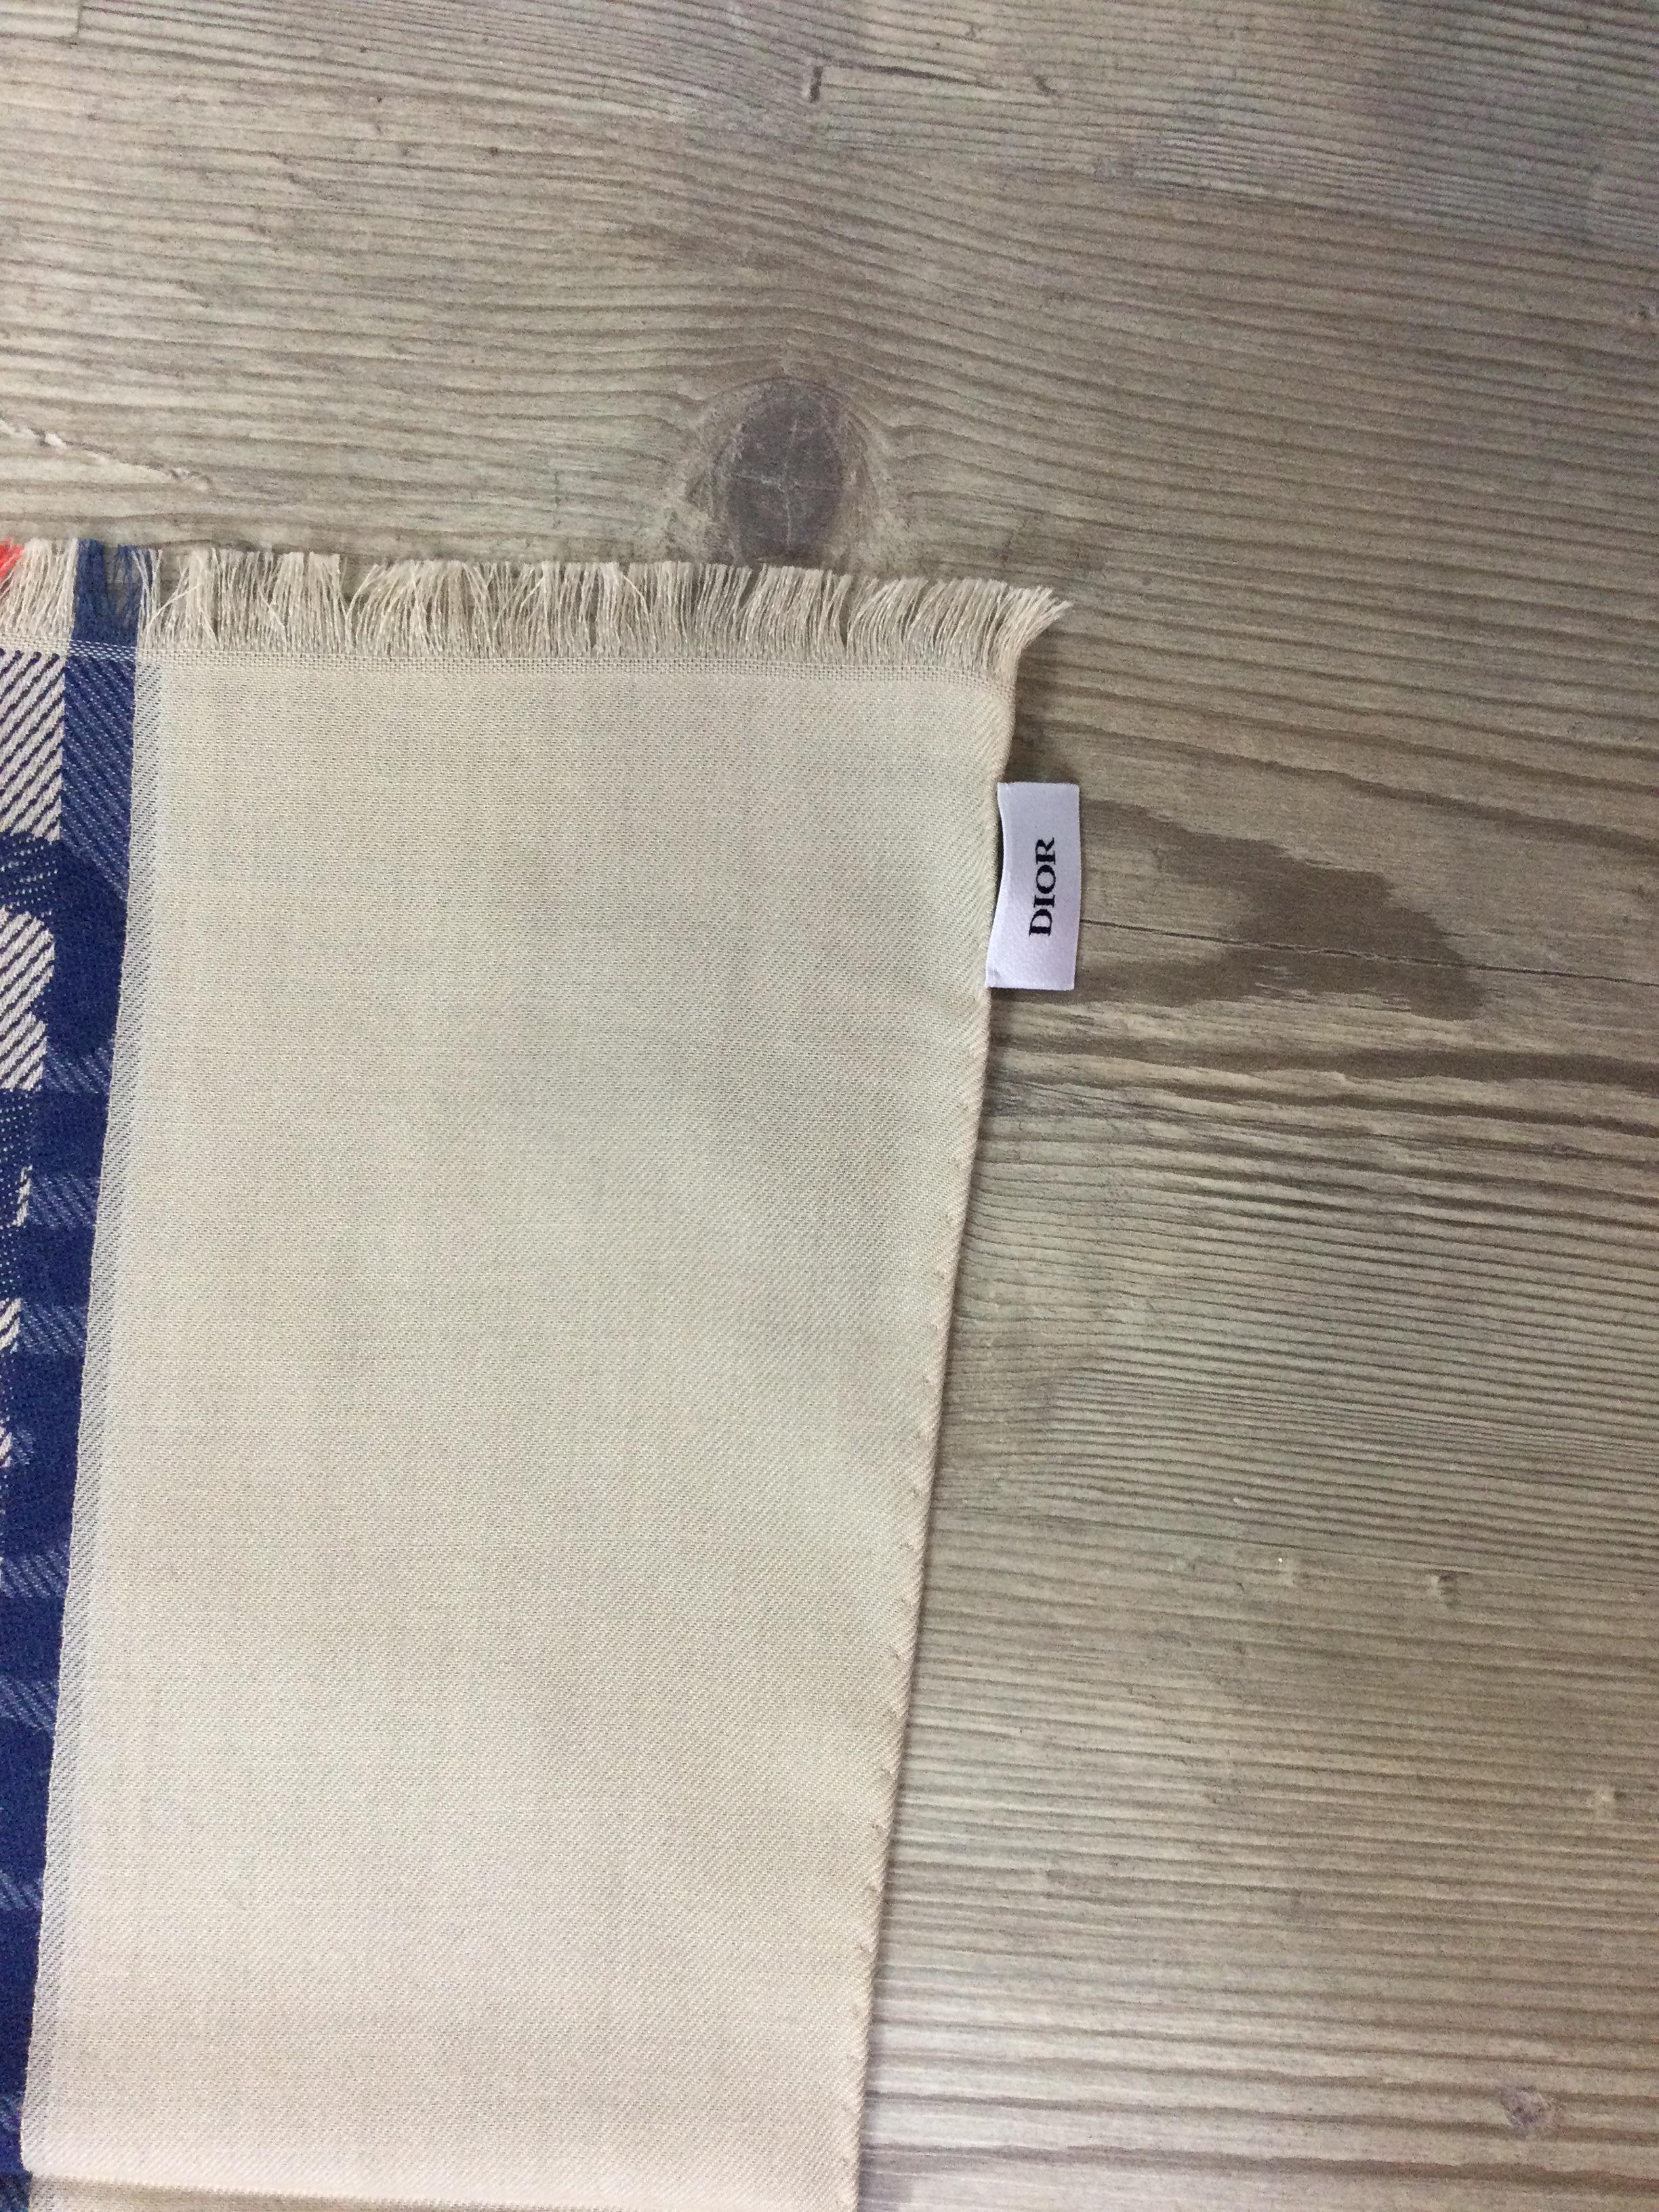 Dior Stole. 
In wool, silk & cashmere.
Featuring small fringes along short sides
Measurements: 200cm X 70 cm.
Conditions: Good - Previously owned and gently worn, with little signs of use. May show slight pilling, pulls or fading.